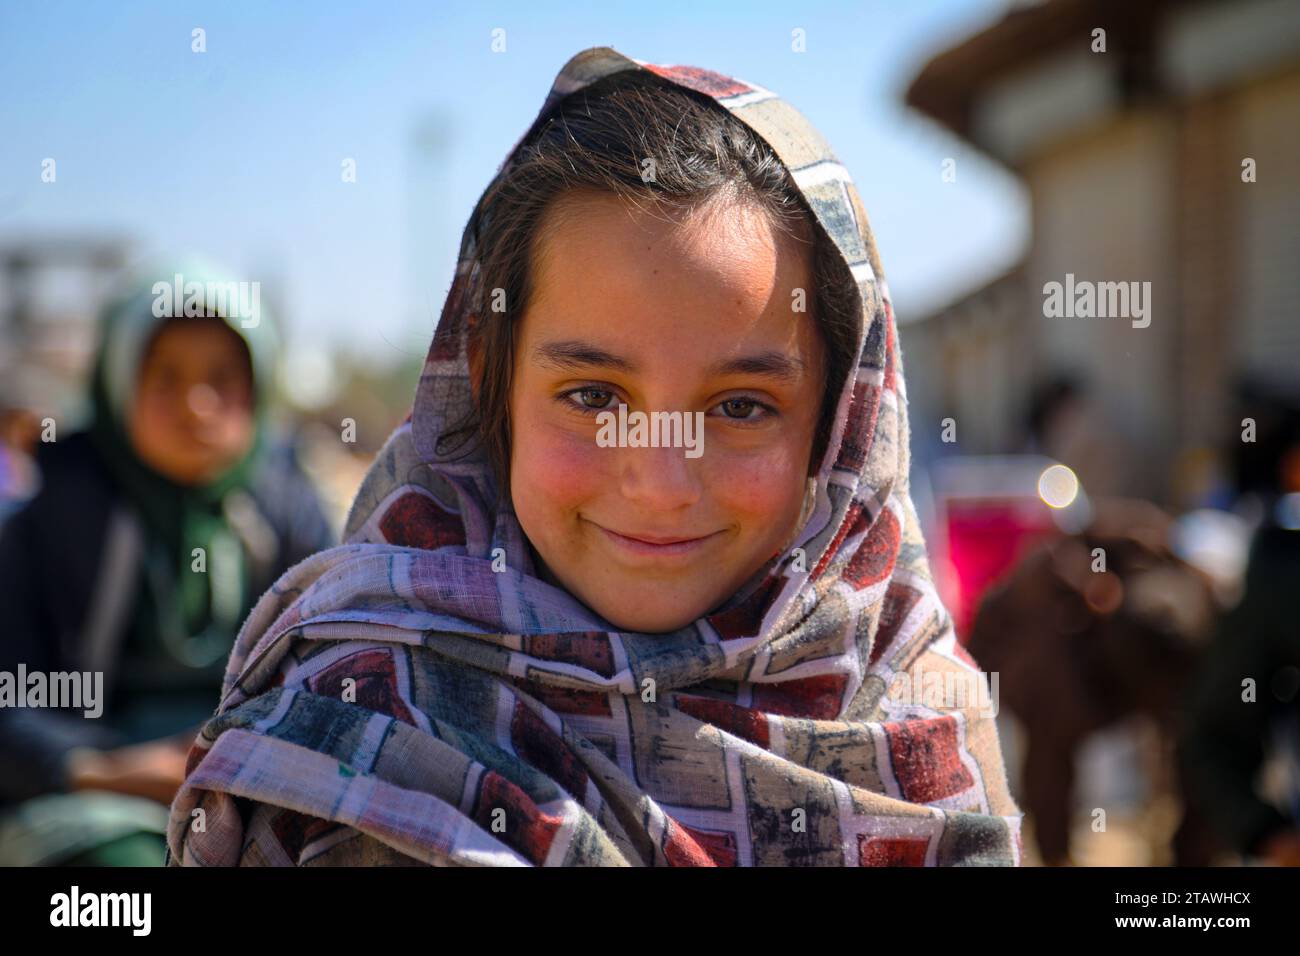 Happy Afghan young girl with a traditional outfit, smiling, looking at the camera. Stock Photo